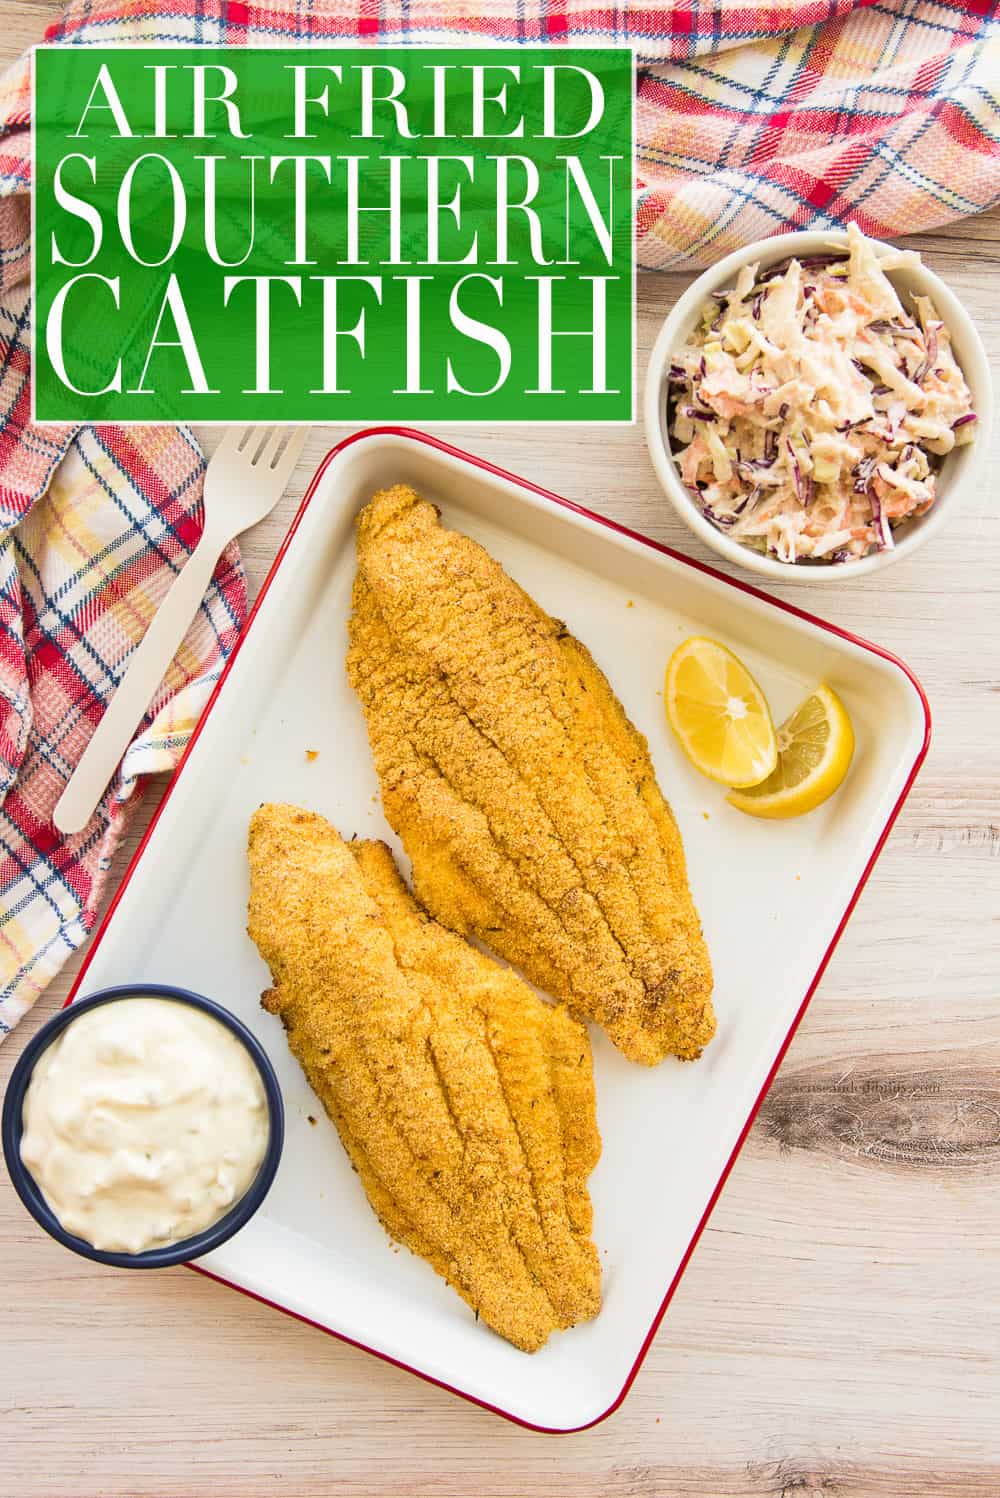 Air Fried Southern Catfish takes the mess out of the soul food classic recipe. This low-fat version doesn't lack in the flavor and crunch you've come to love in the traditional recipe, it's just faster to make. Serve with homemade coleslaw and tartar sauce. #southerncatfish #catfishrecipe #fishfry #airfryerrecipes #soulfood #seafood #fishrecipe #catfish #southernrecipes #lowfat #watergrows #texascorn #NRCSTexas #ad via @ediblesense